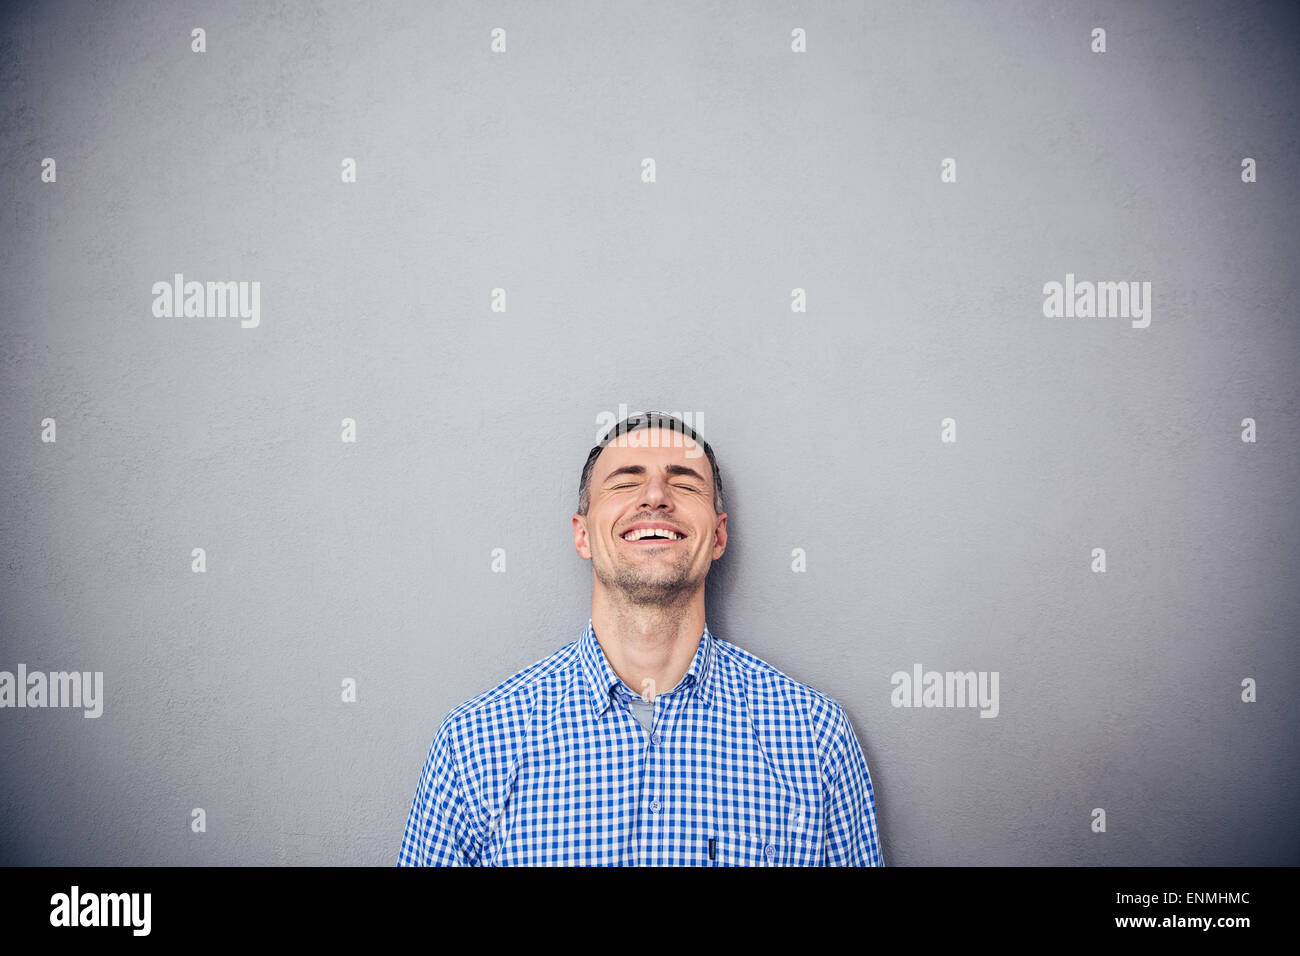 Portrait of a laughing young man over gray background. Leaning on the gray wall Stock Photo